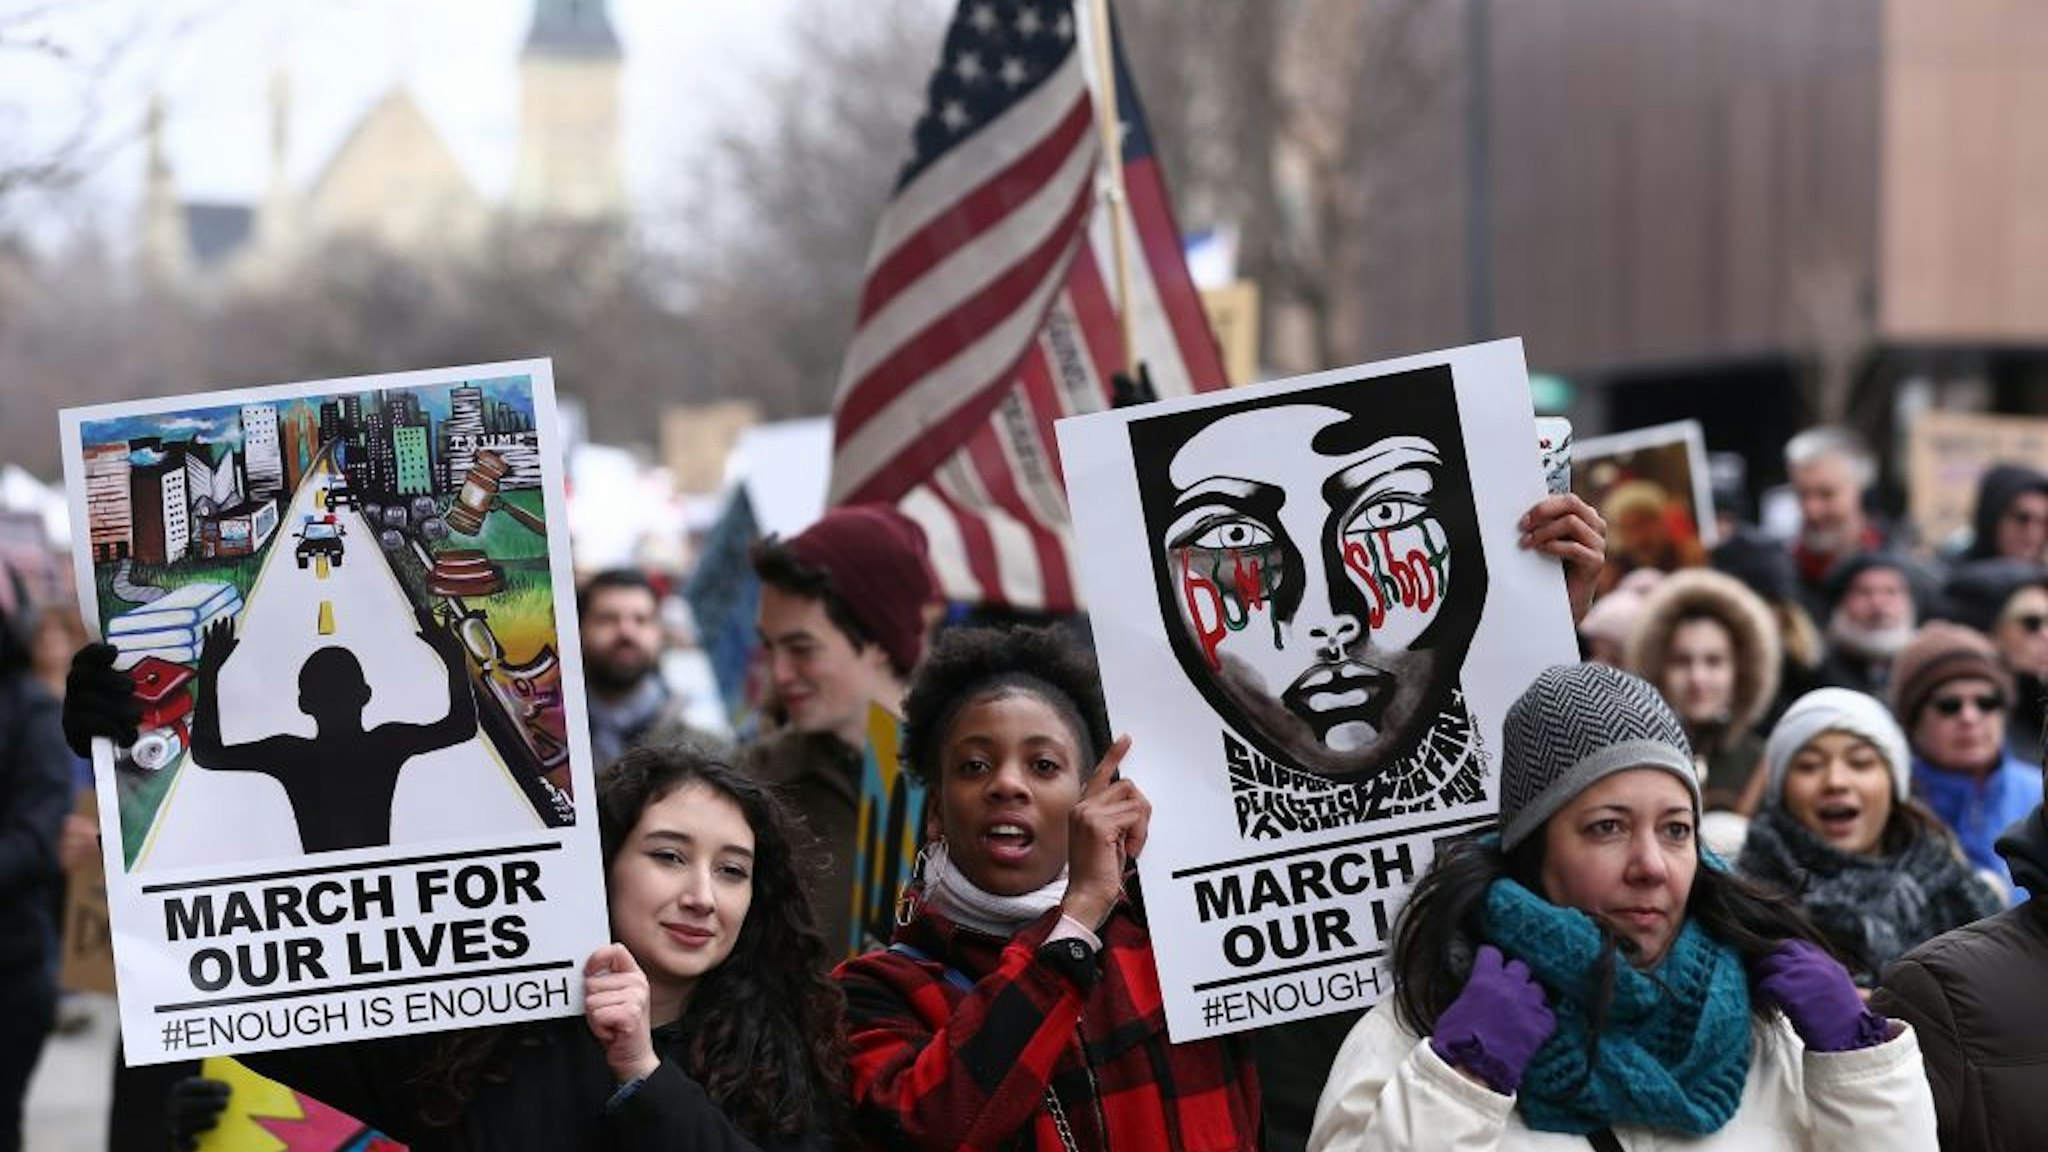 "March For Our Lives" Protest in Chicago